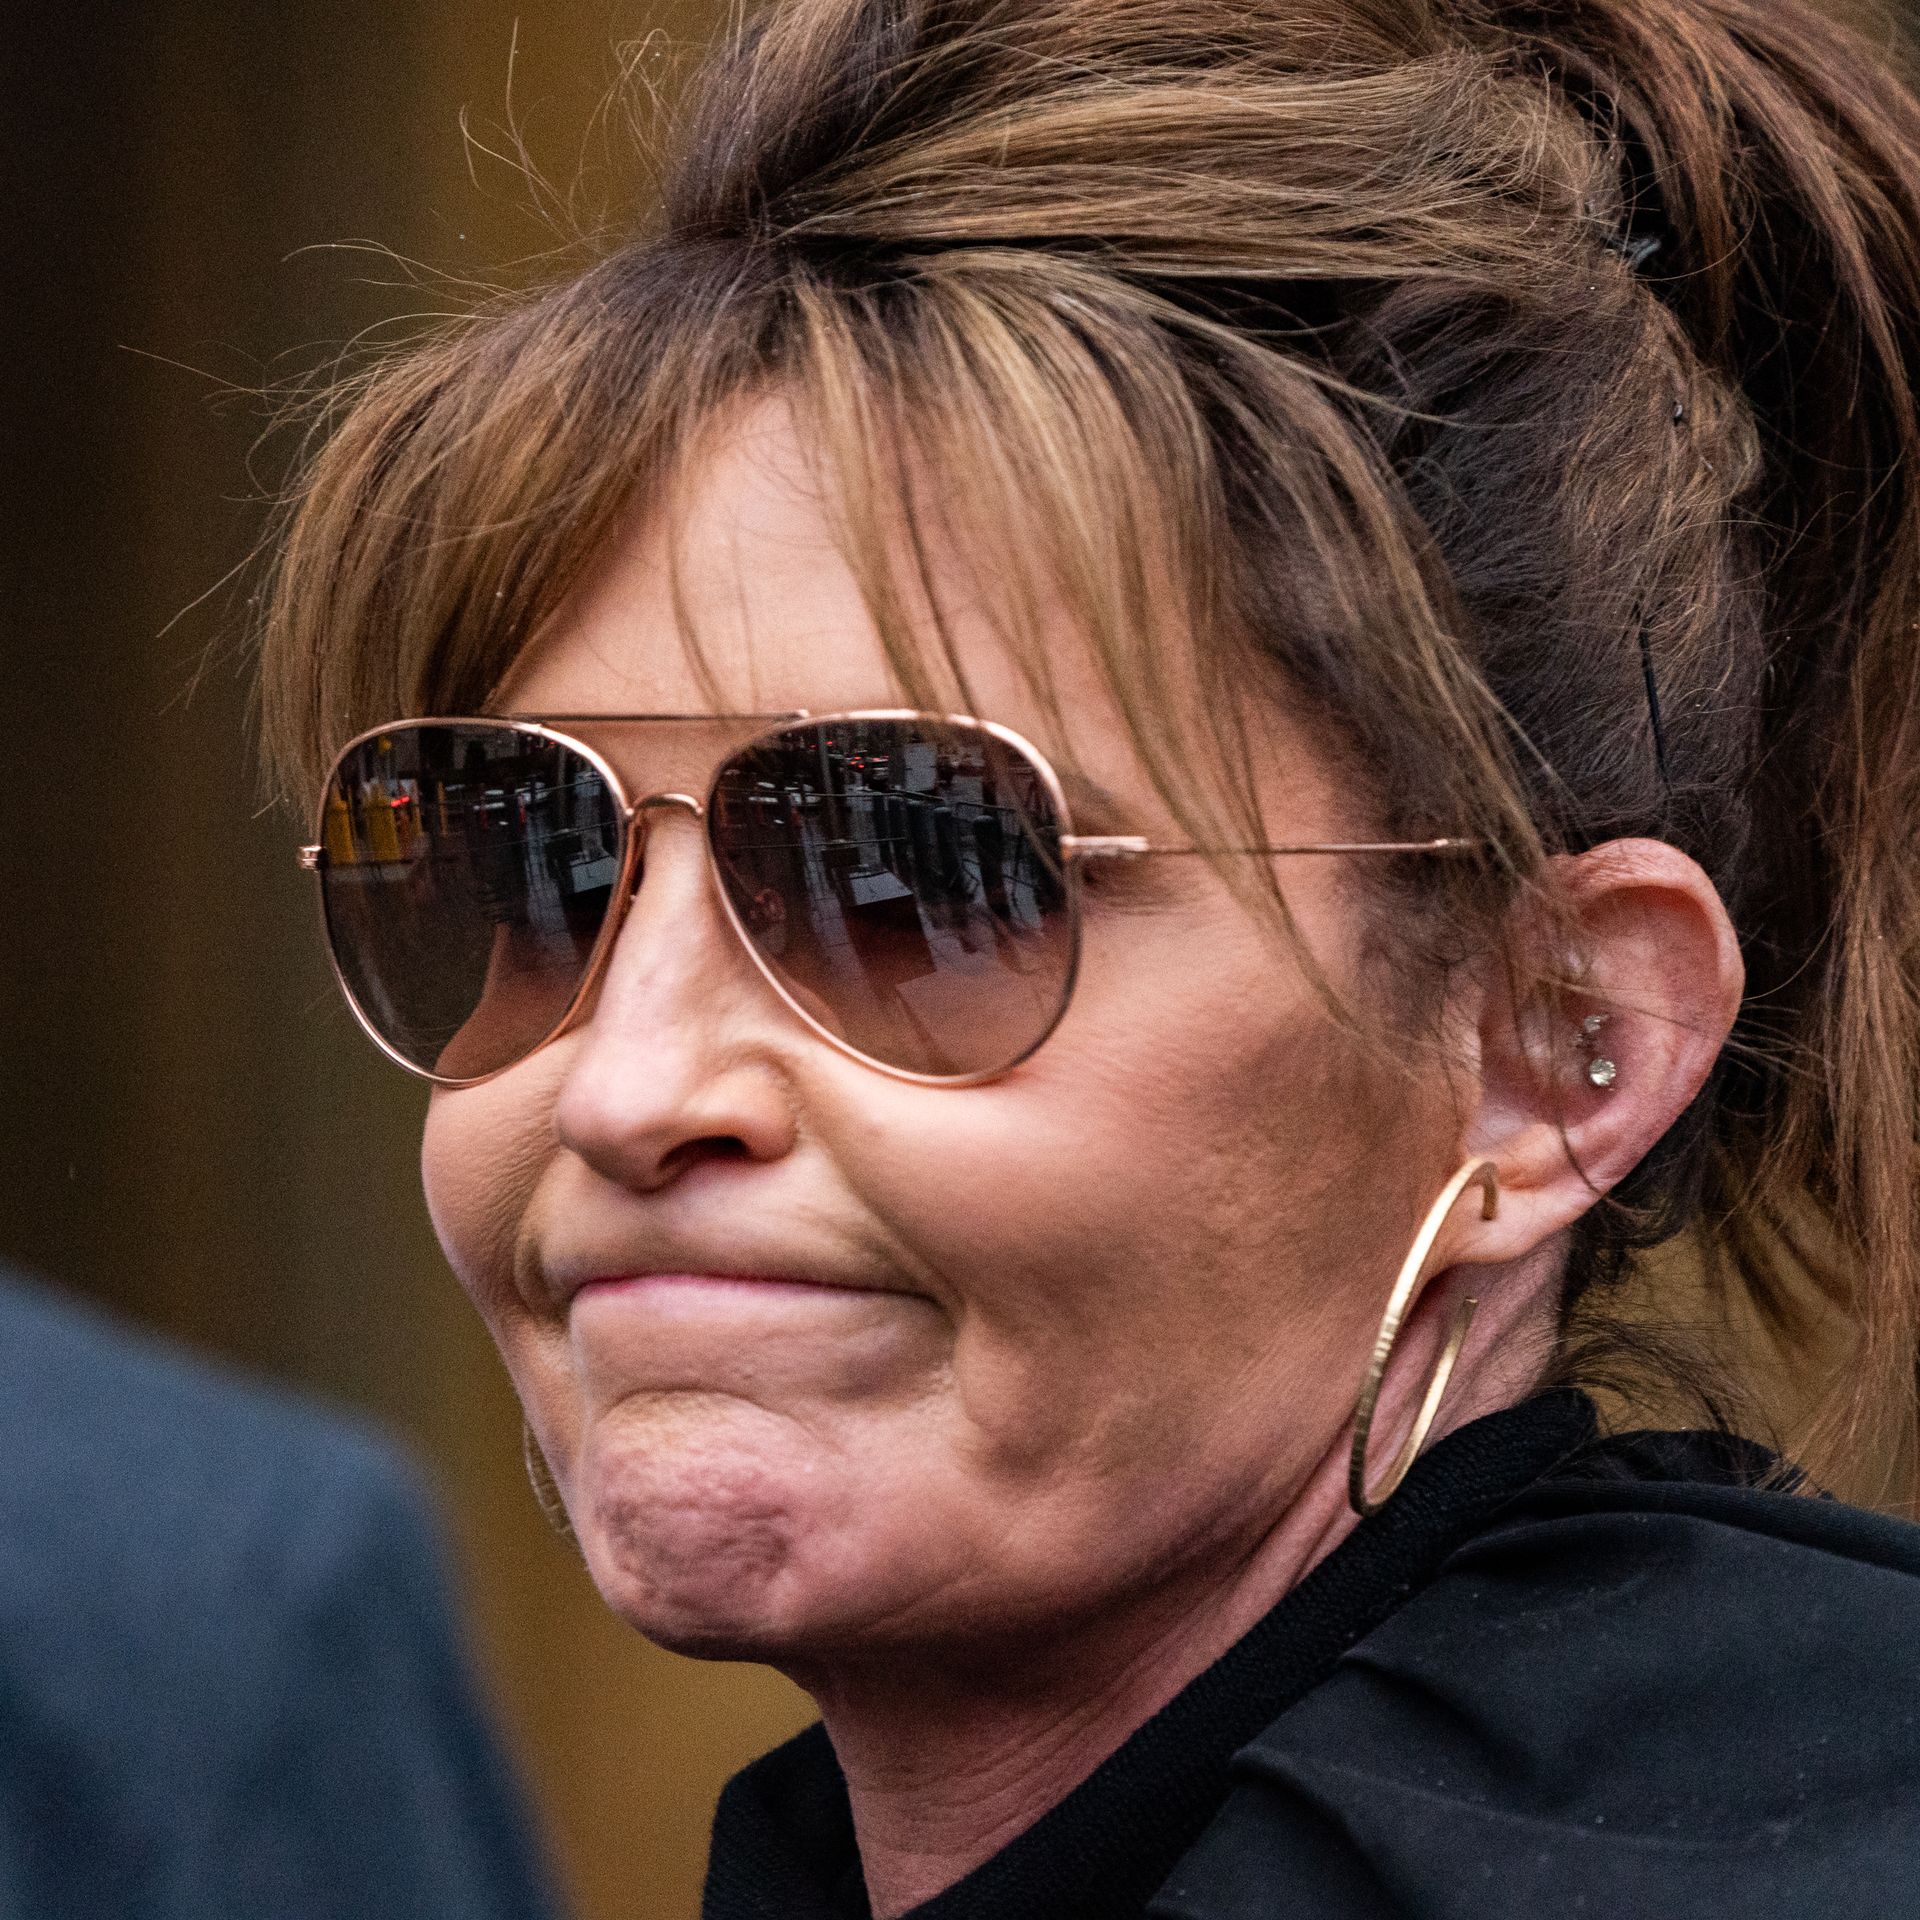 Sarah Palin loses lawsuit against New York Times over editorial